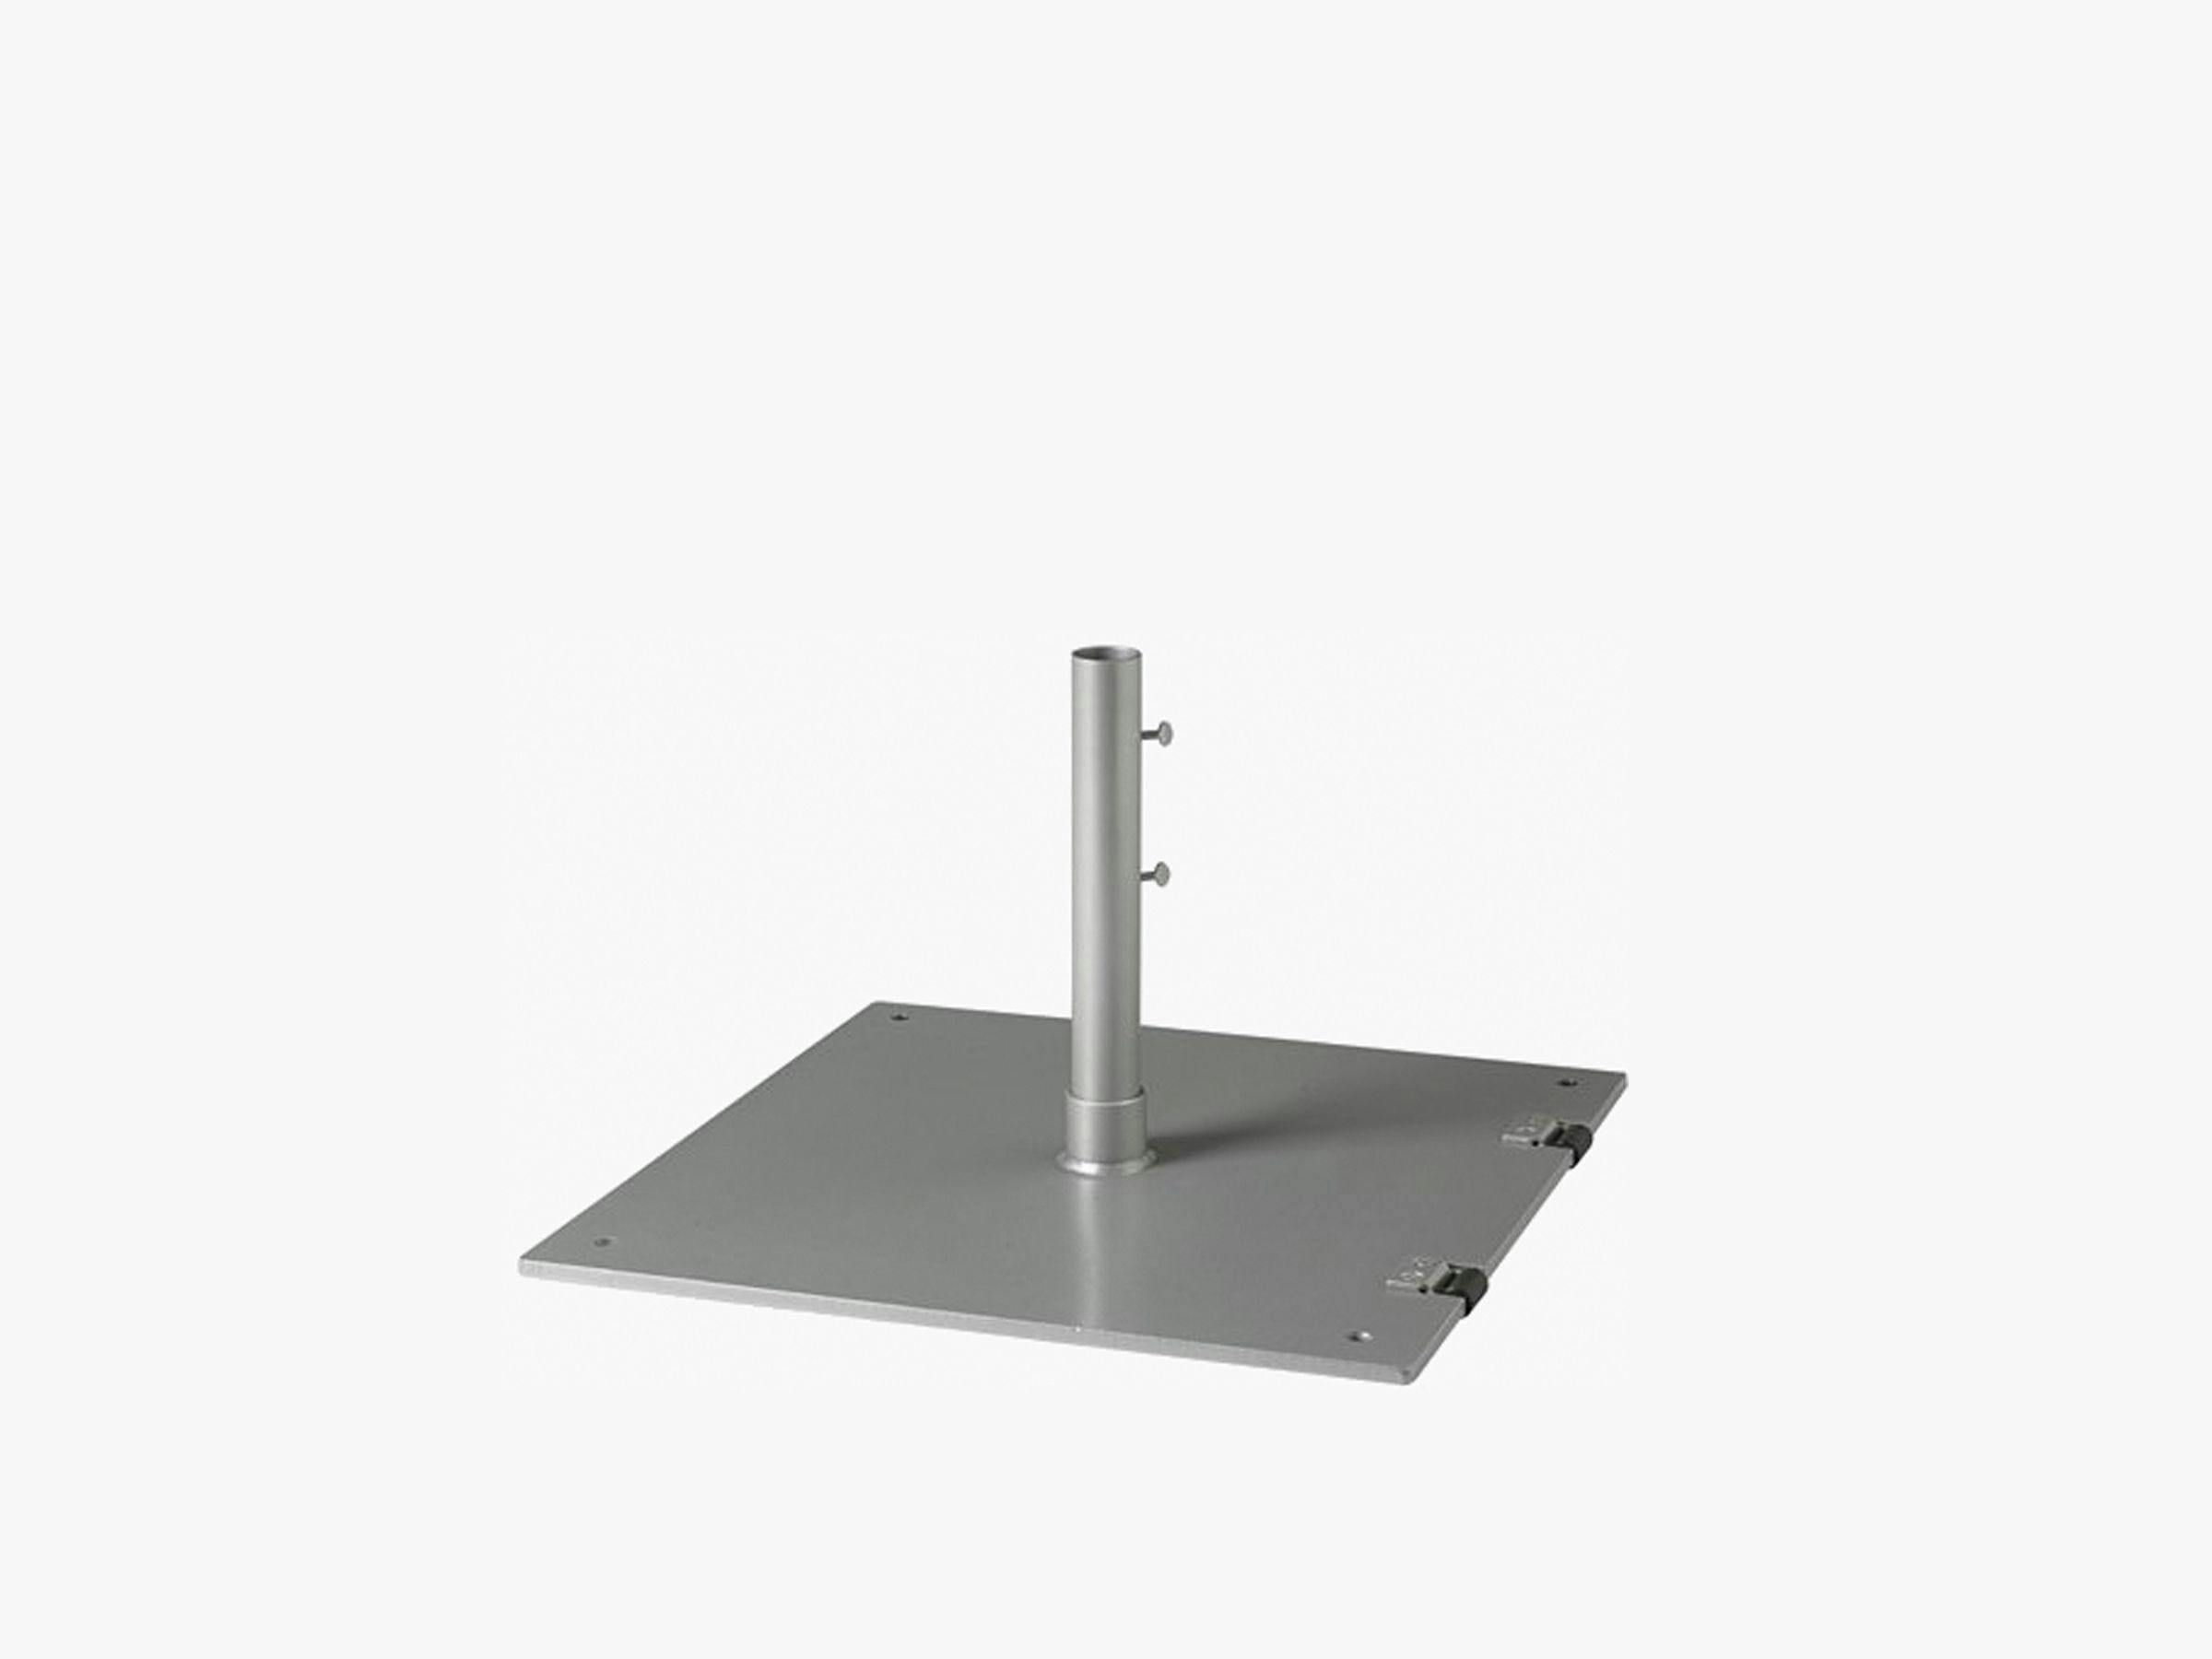 Steel Plate Base, 24" Square - Fits 1.5" Pole